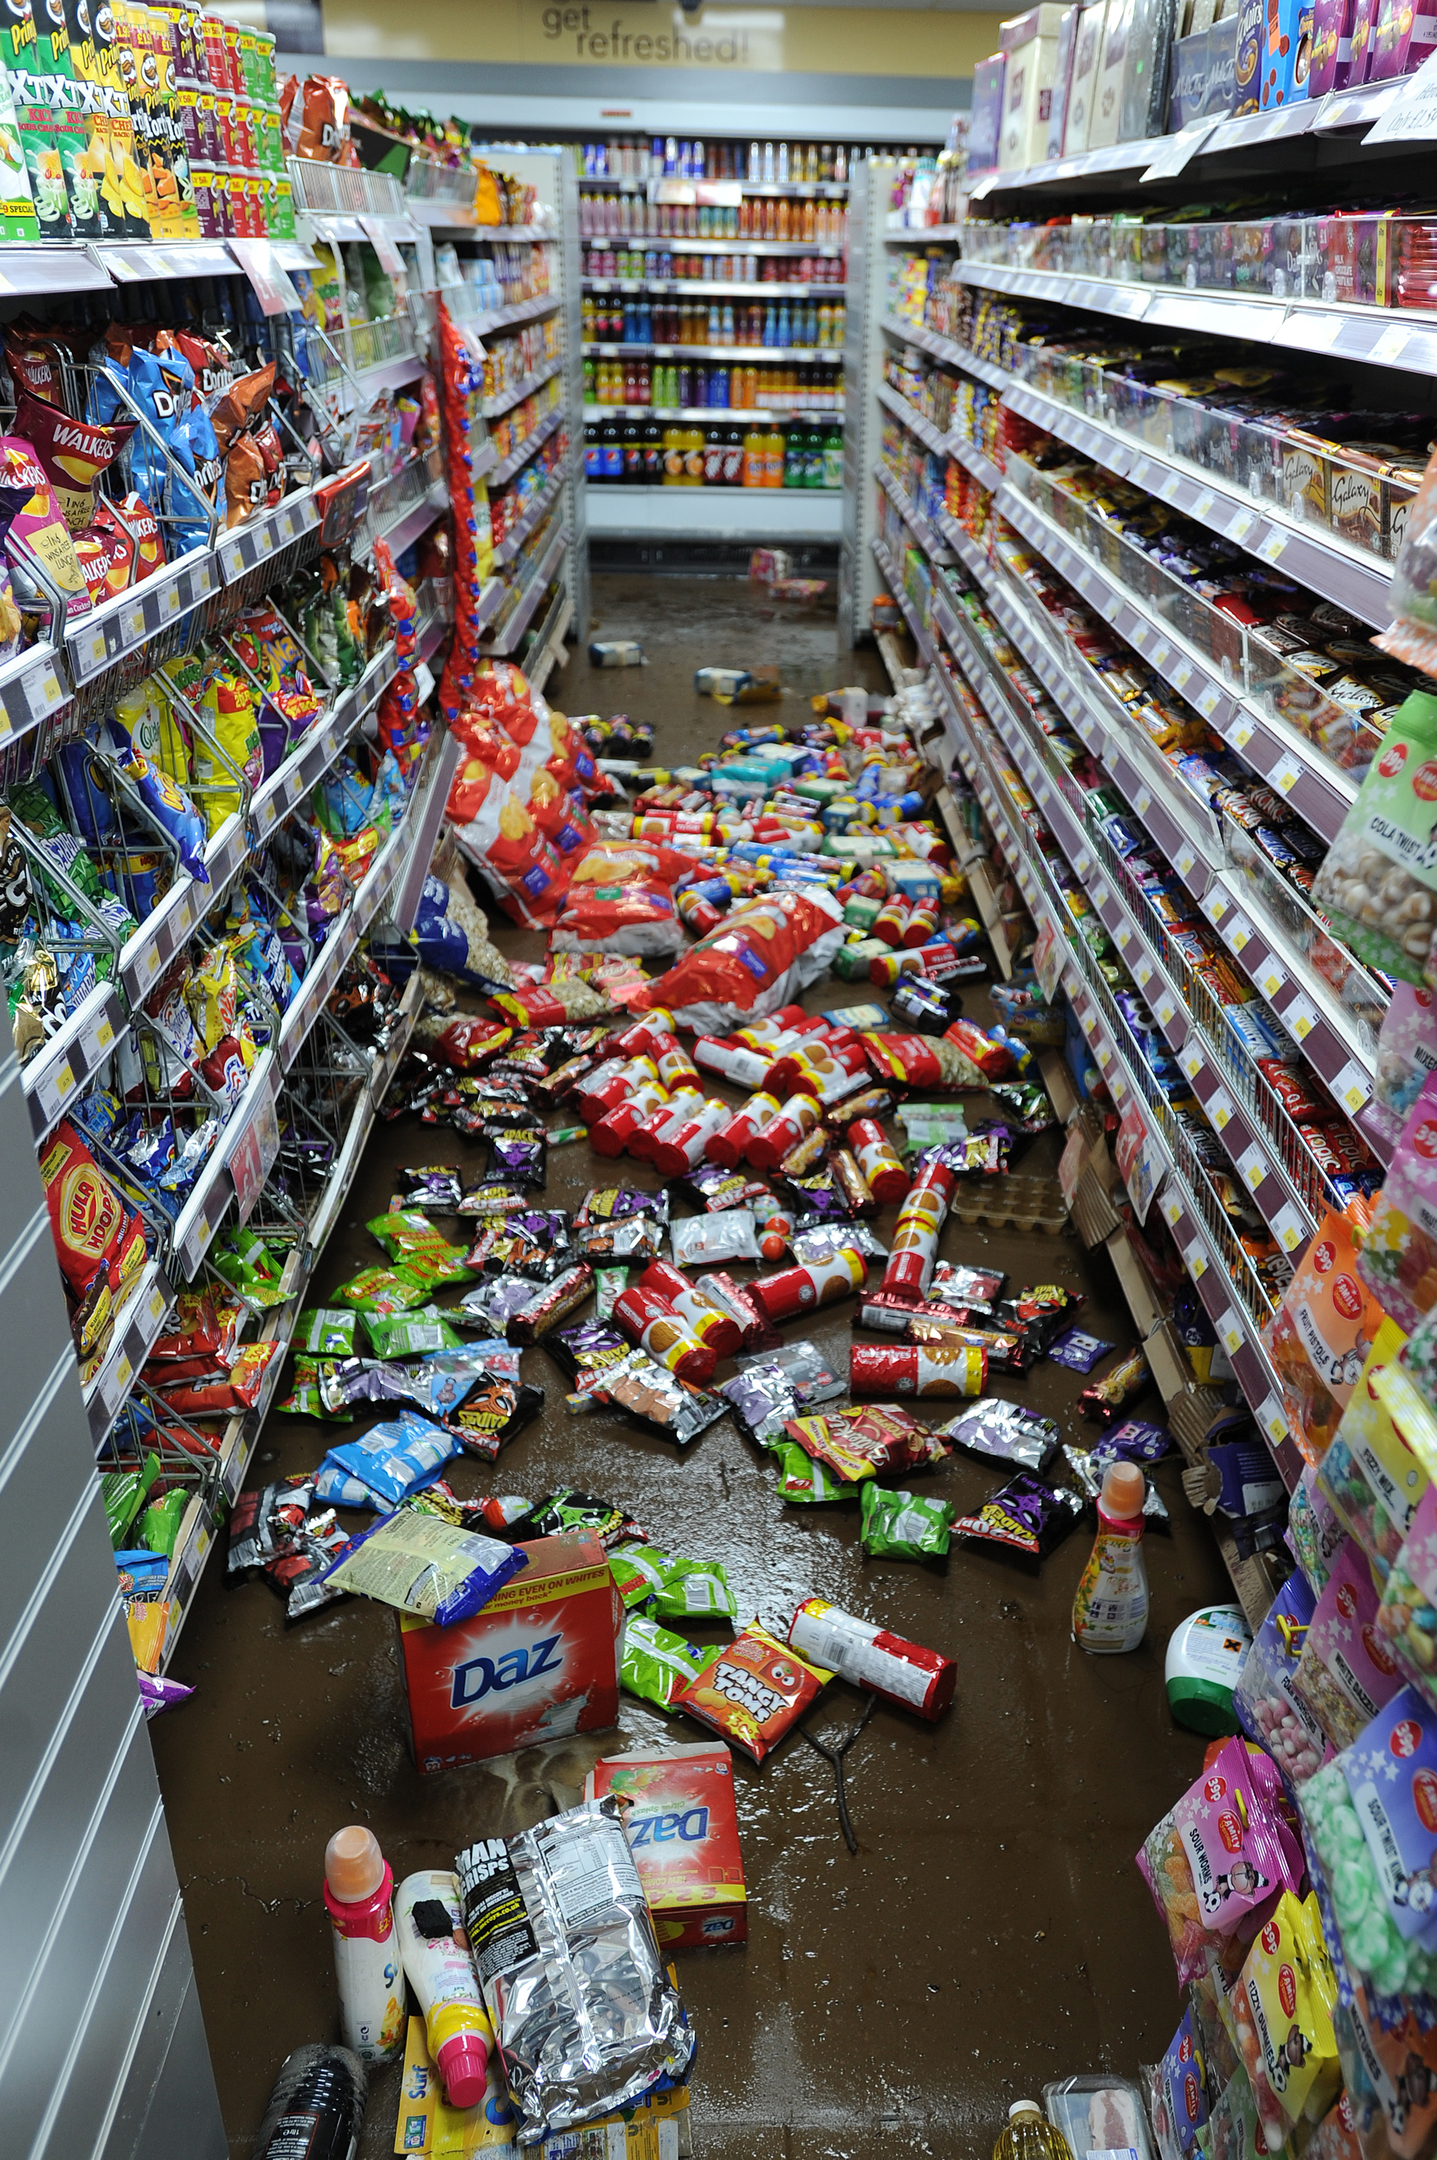 The damage in the Premier Convenience store, Commercial Street.